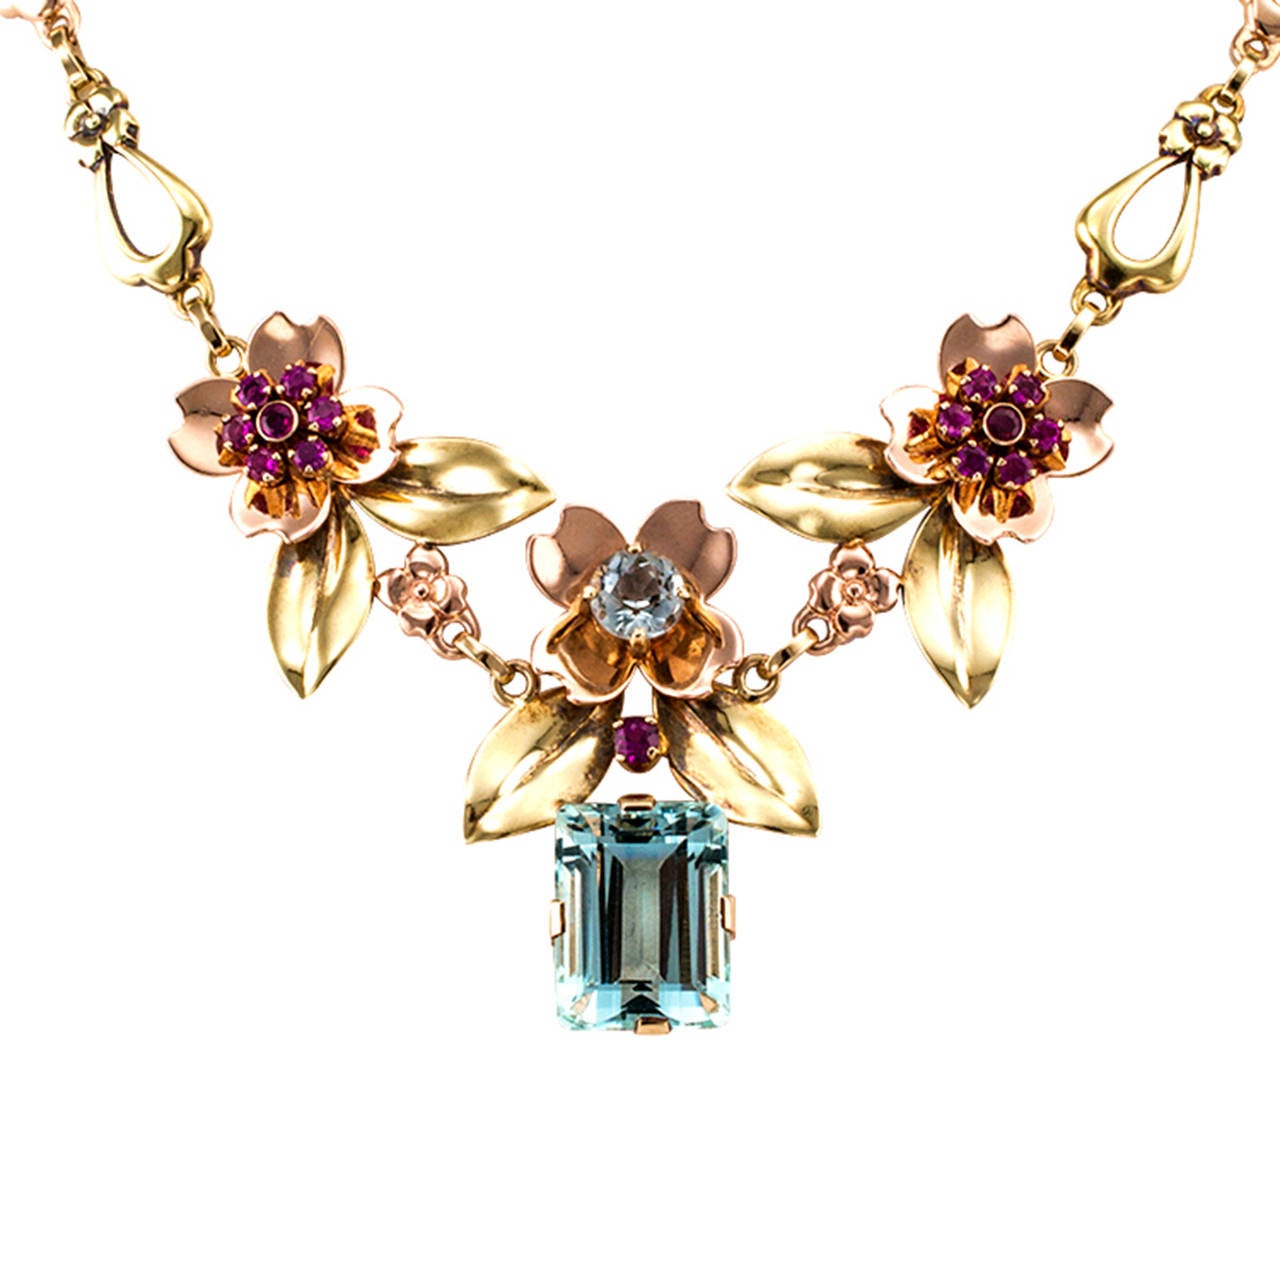 Aquamarine And Ruby Pink And Green Gold Retro Necklace

Sweet and lovely never looked as self assured and feminine as they do in this beautiful example of Retro jewelry.  The designer achieves maximum impact by using alternating elements of green